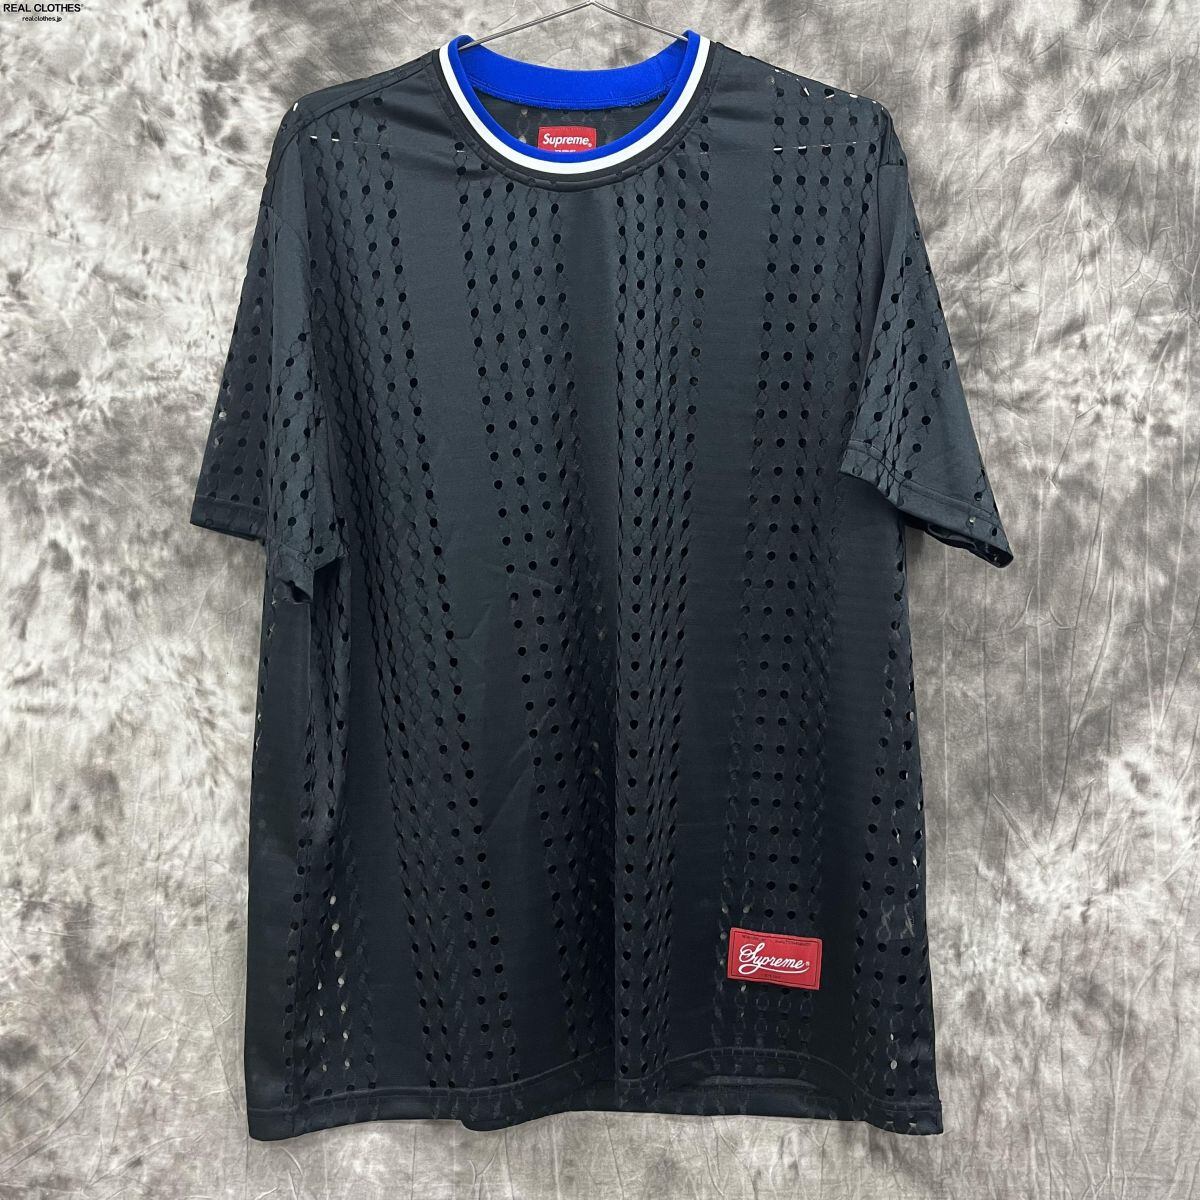 supreme Perforated Stripe Warm Up Top